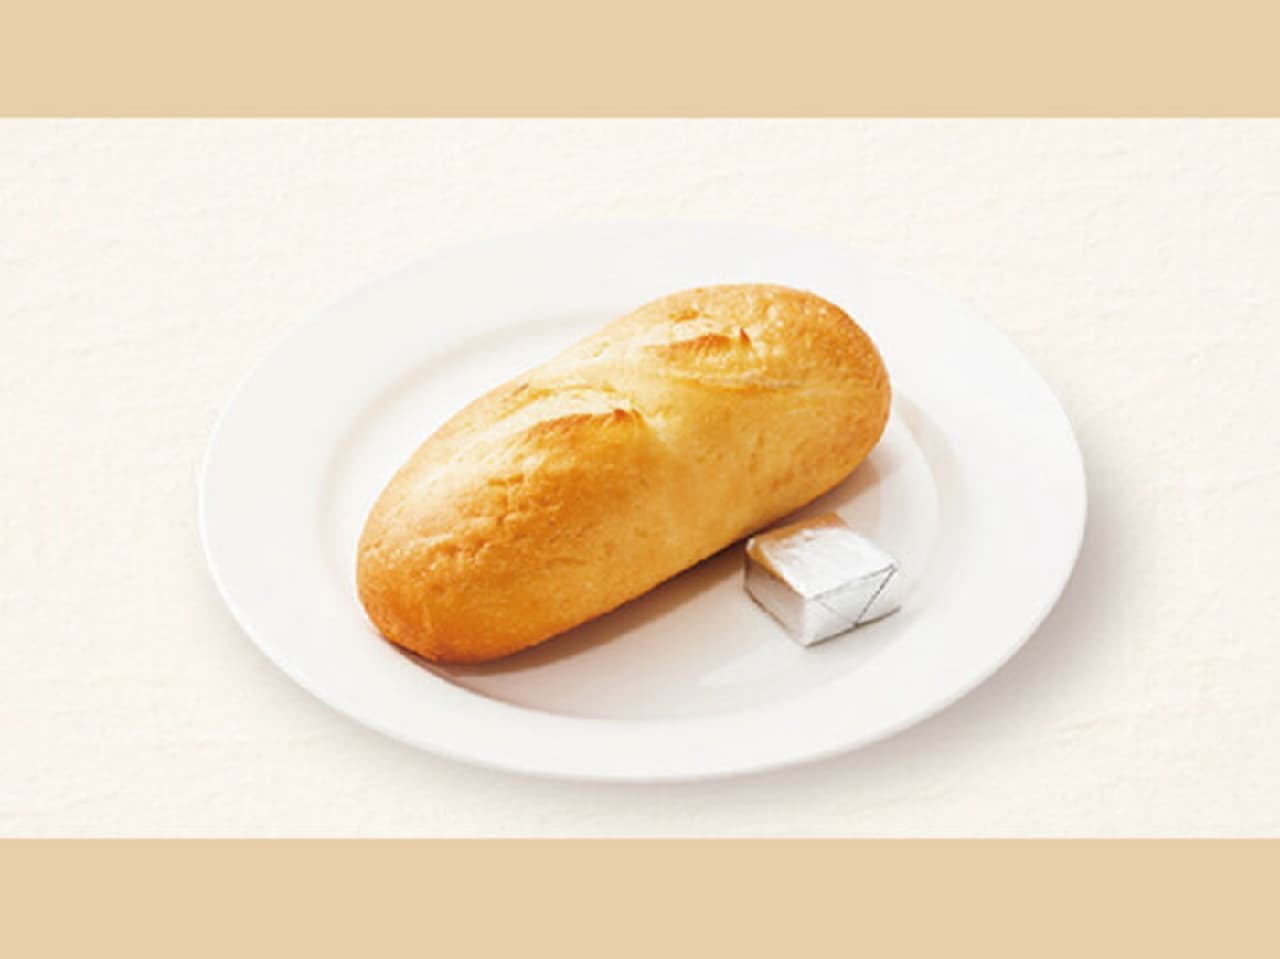 Gusto "Soft French Bread